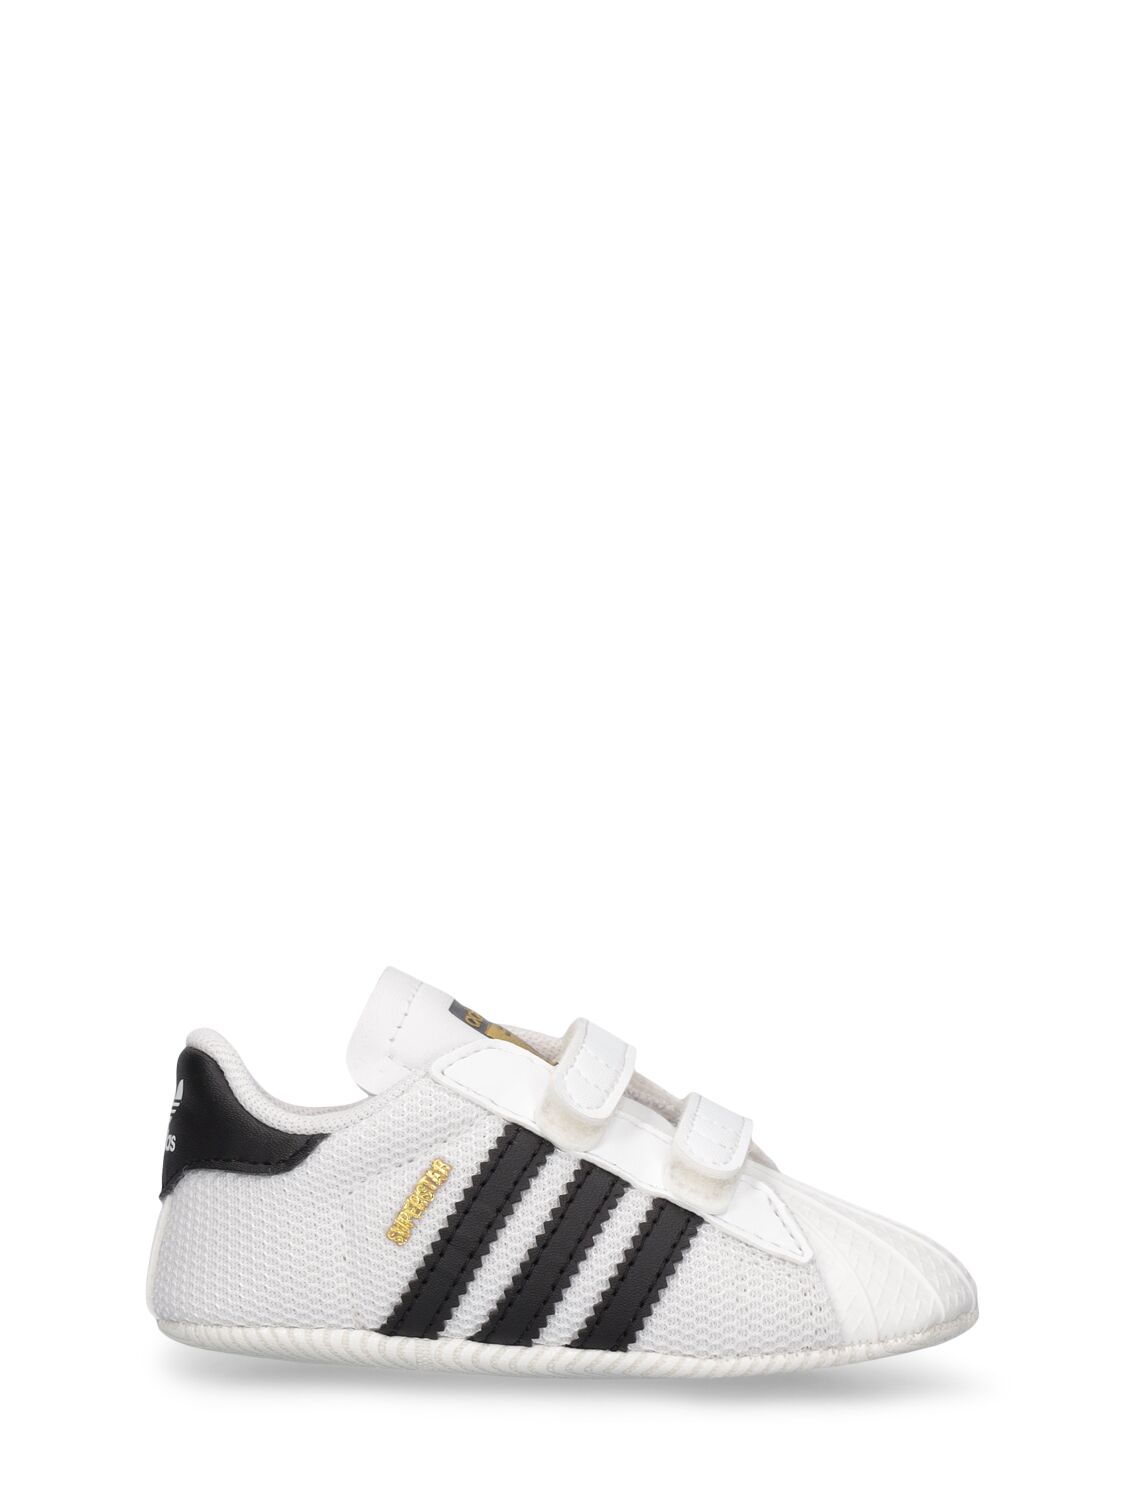 Image of Superstar Crib Faux Leather Sneakers